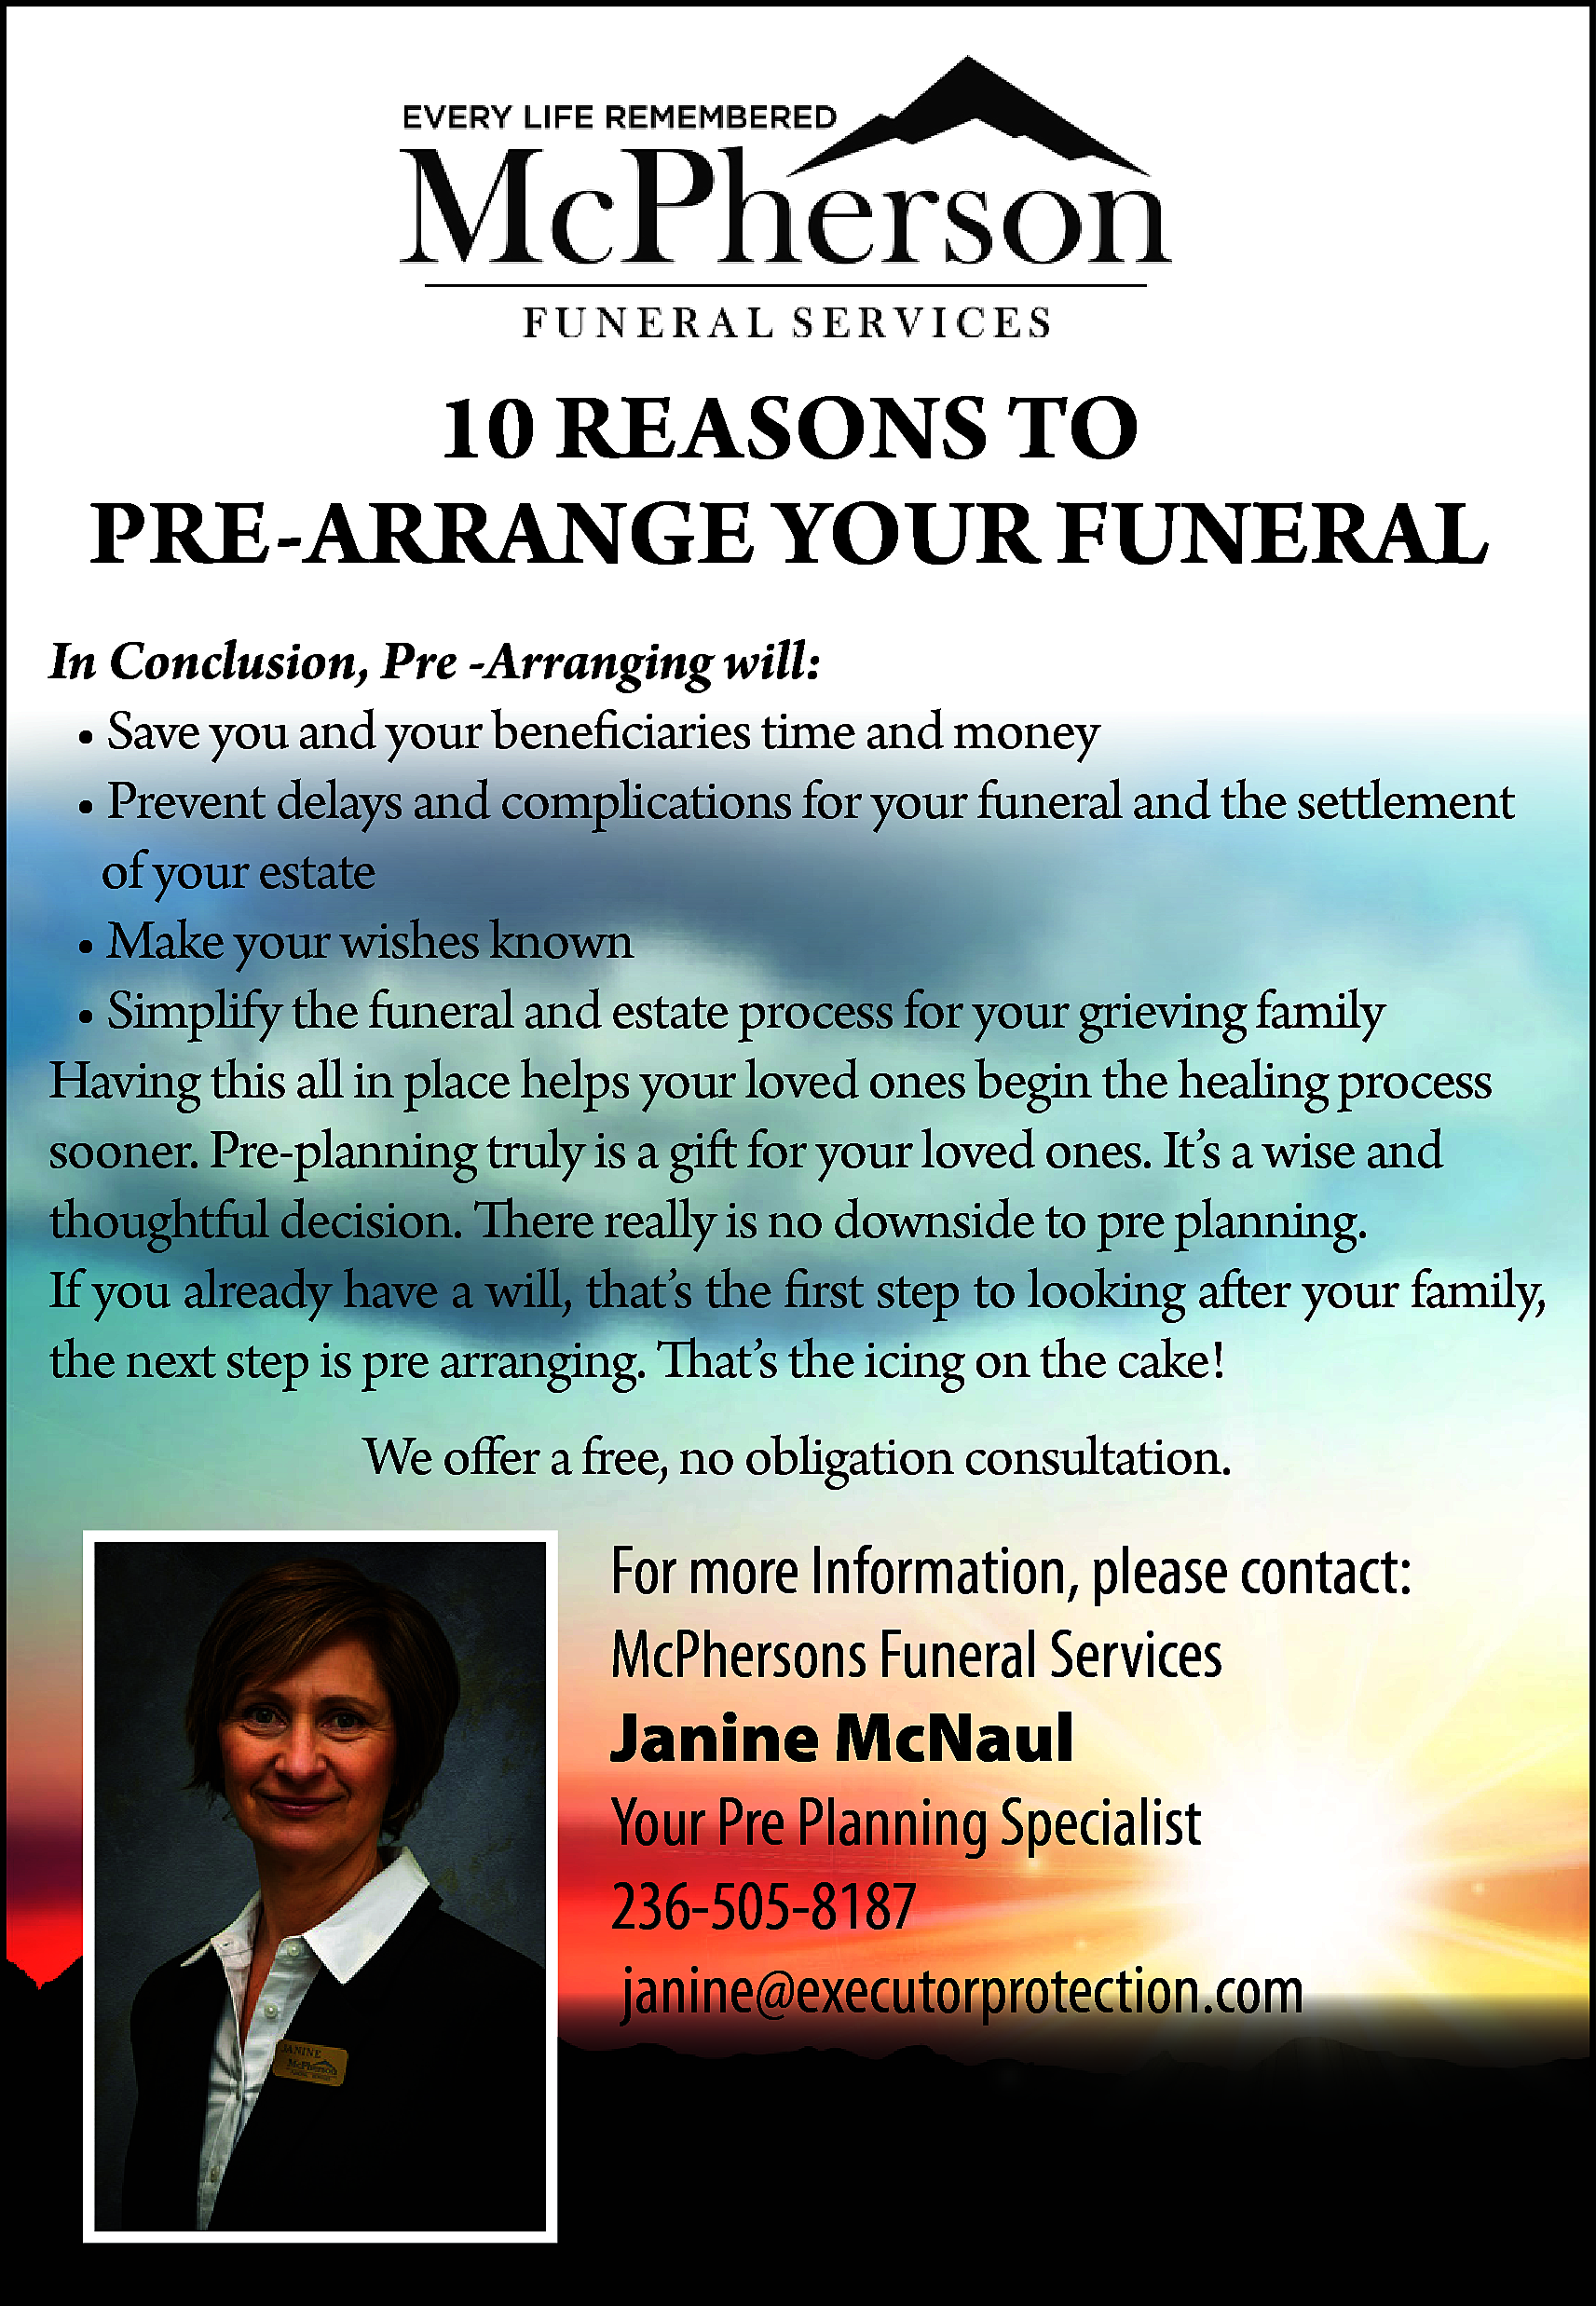 10 REASONS TO <br>PRE-ARRANGE YOUR  10 REASONS TO  PRE-ARRANGE YOUR FUNERAL  In Conclusion, Pre -Arranging will:  • Save you and your beneficiaries time and money  • Prevent delays and complications for your funeral and the settlement  of your estate  • Make your wishes known  • Simplify the funeral and estate process for your grieving family  Having this all in place helps your loved ones begin the healing process  sooner. Pre-planning truly is a gift for your loved ones. It’s a wise and  thoughtful decision. There really is no downside to pre planning.  If you already have a will, that’s the first step to looking after your family,  the next step is pre arranging. That’s the icing on the cake!  We offer a free, no obligation consultation.    For more Information, please contact:  McPhersons Funeral Services  Janine McNaul  Your Pre Planning Specialist  236-505-8187  janine@executorprotection.com    